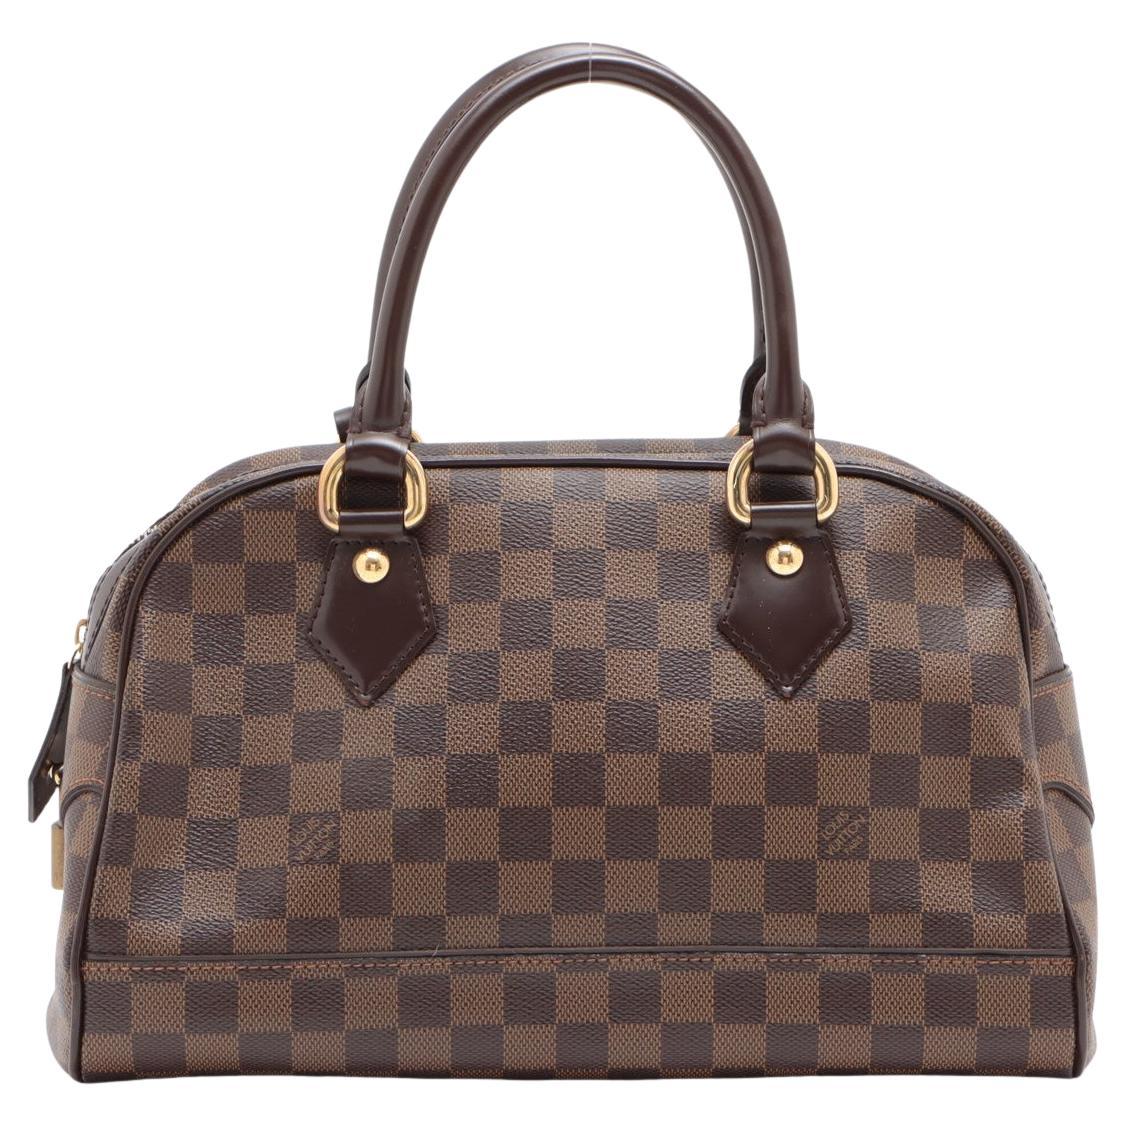 Brown Damier Ebene coated canvas Louis Vuitton Duomo hobo bag with gold-tone  For Sale